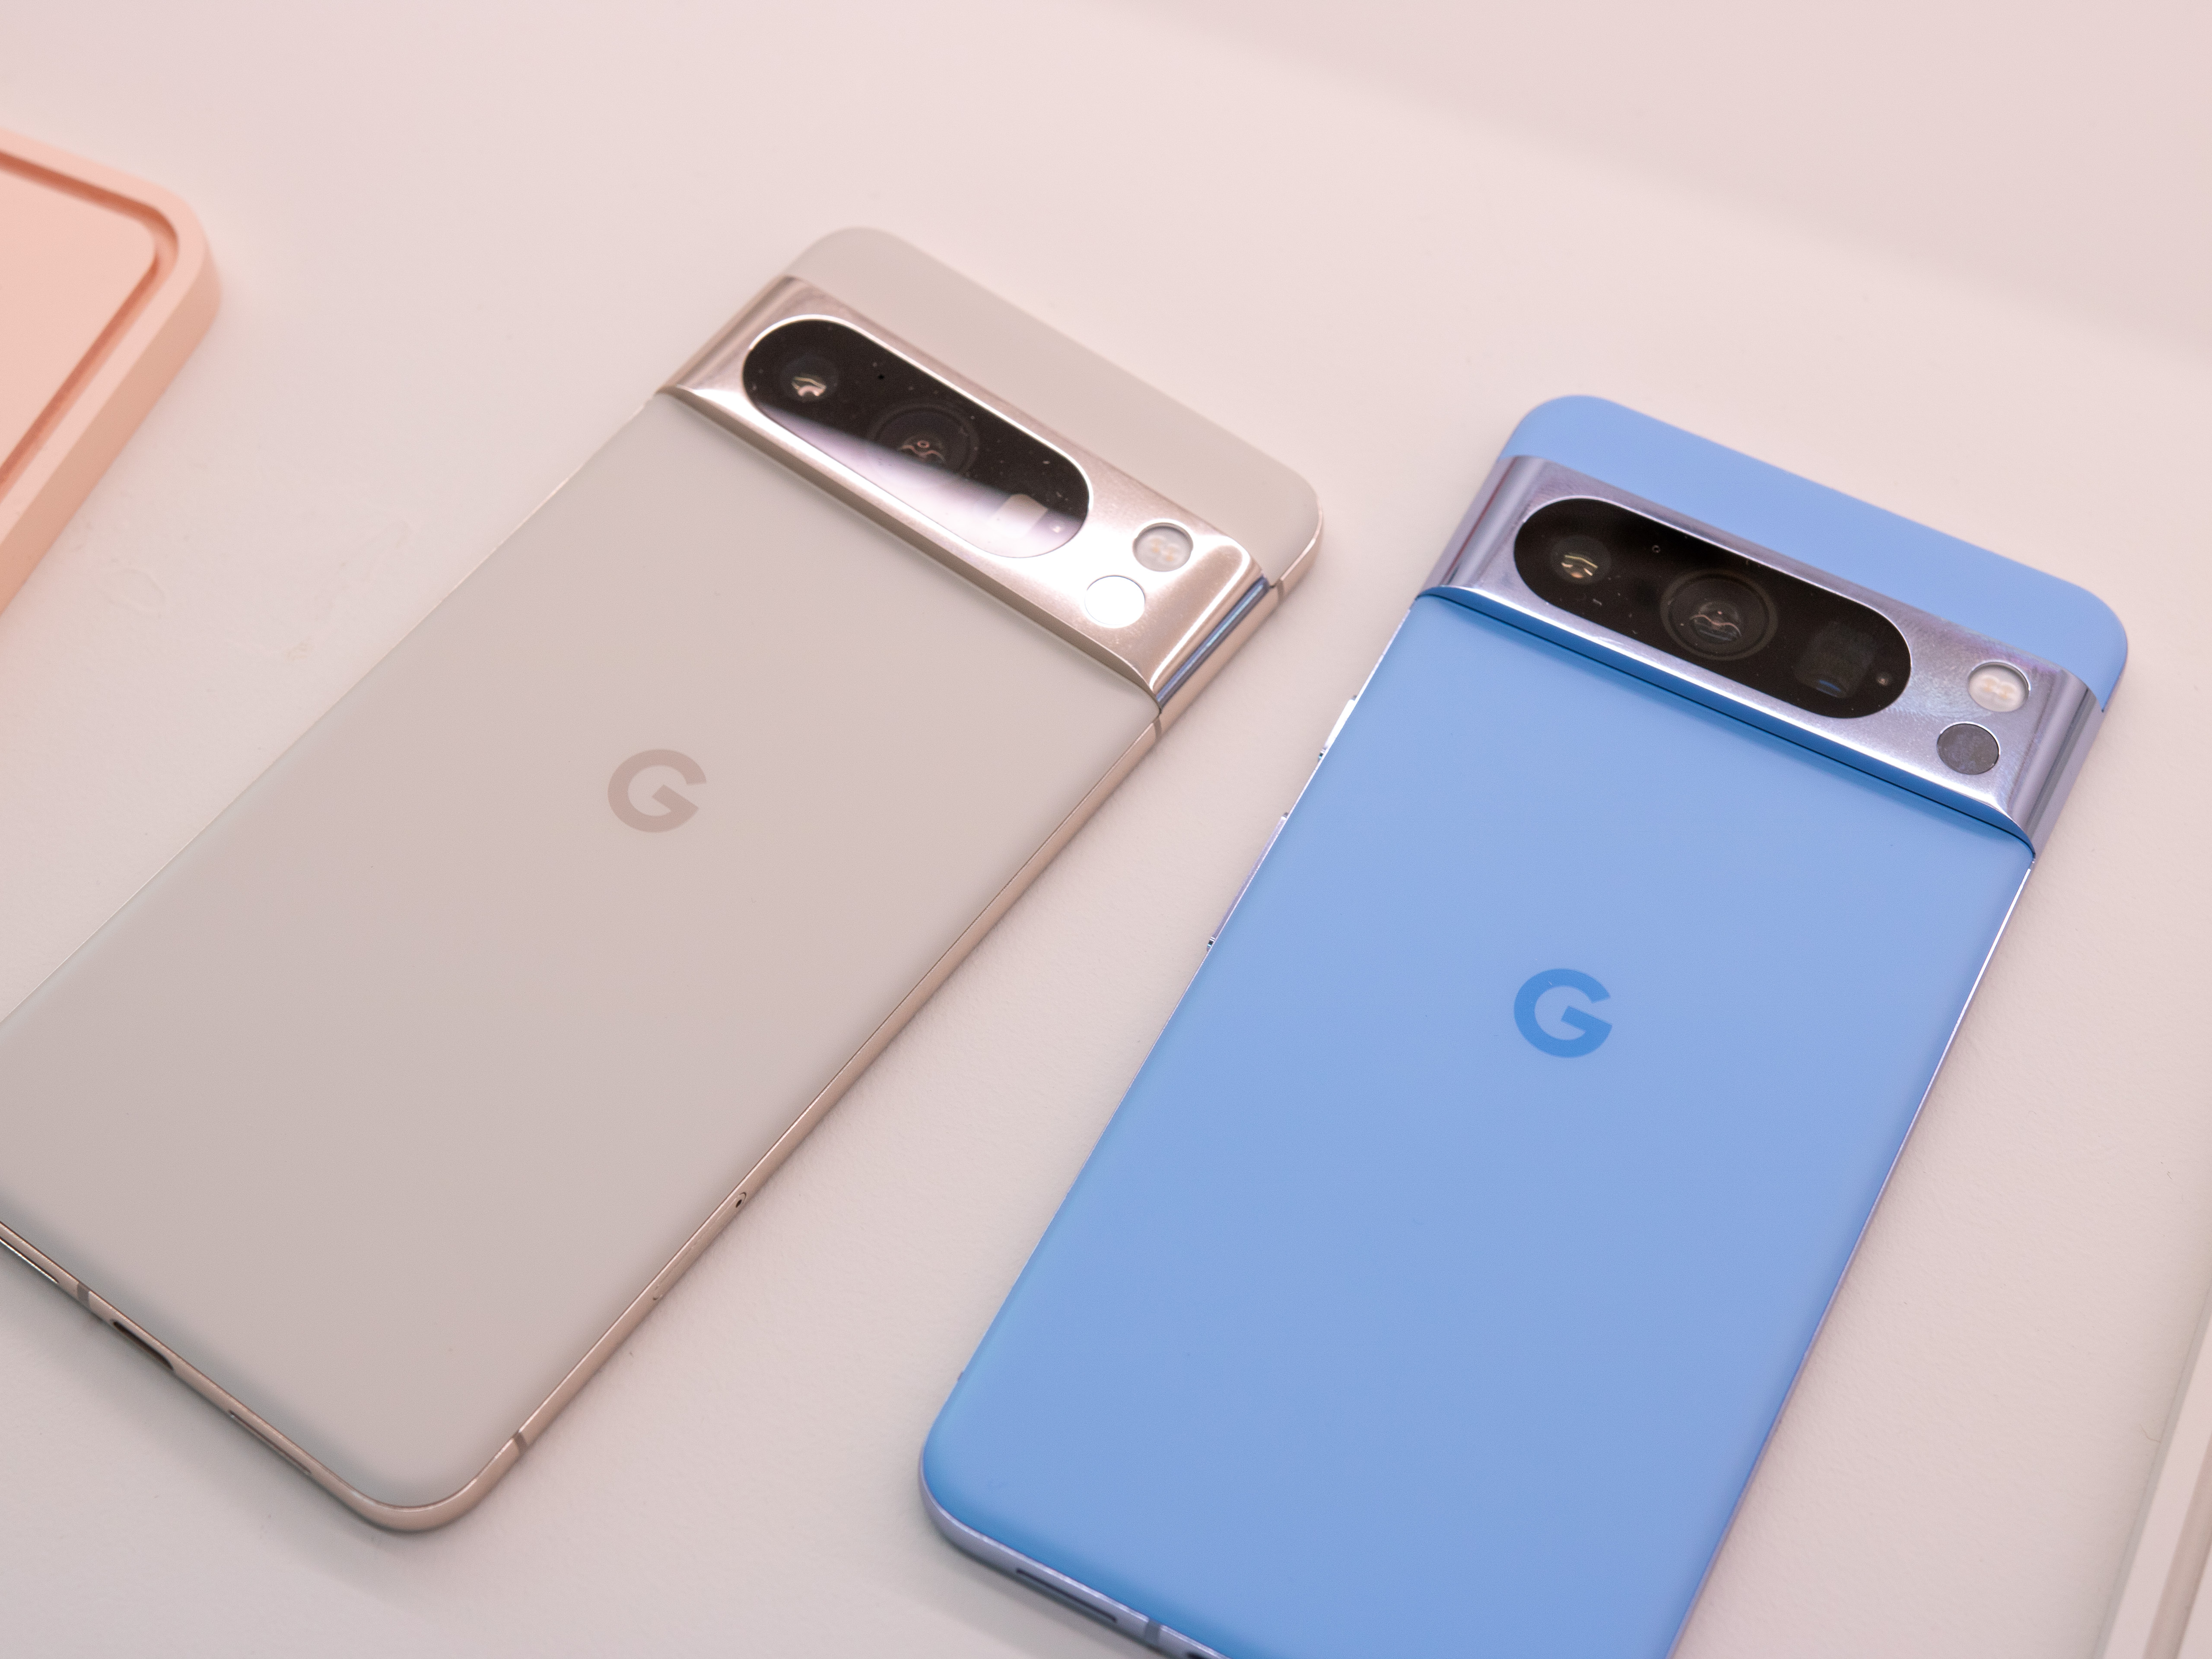 Google Pixel 8 Pro in white and blue.